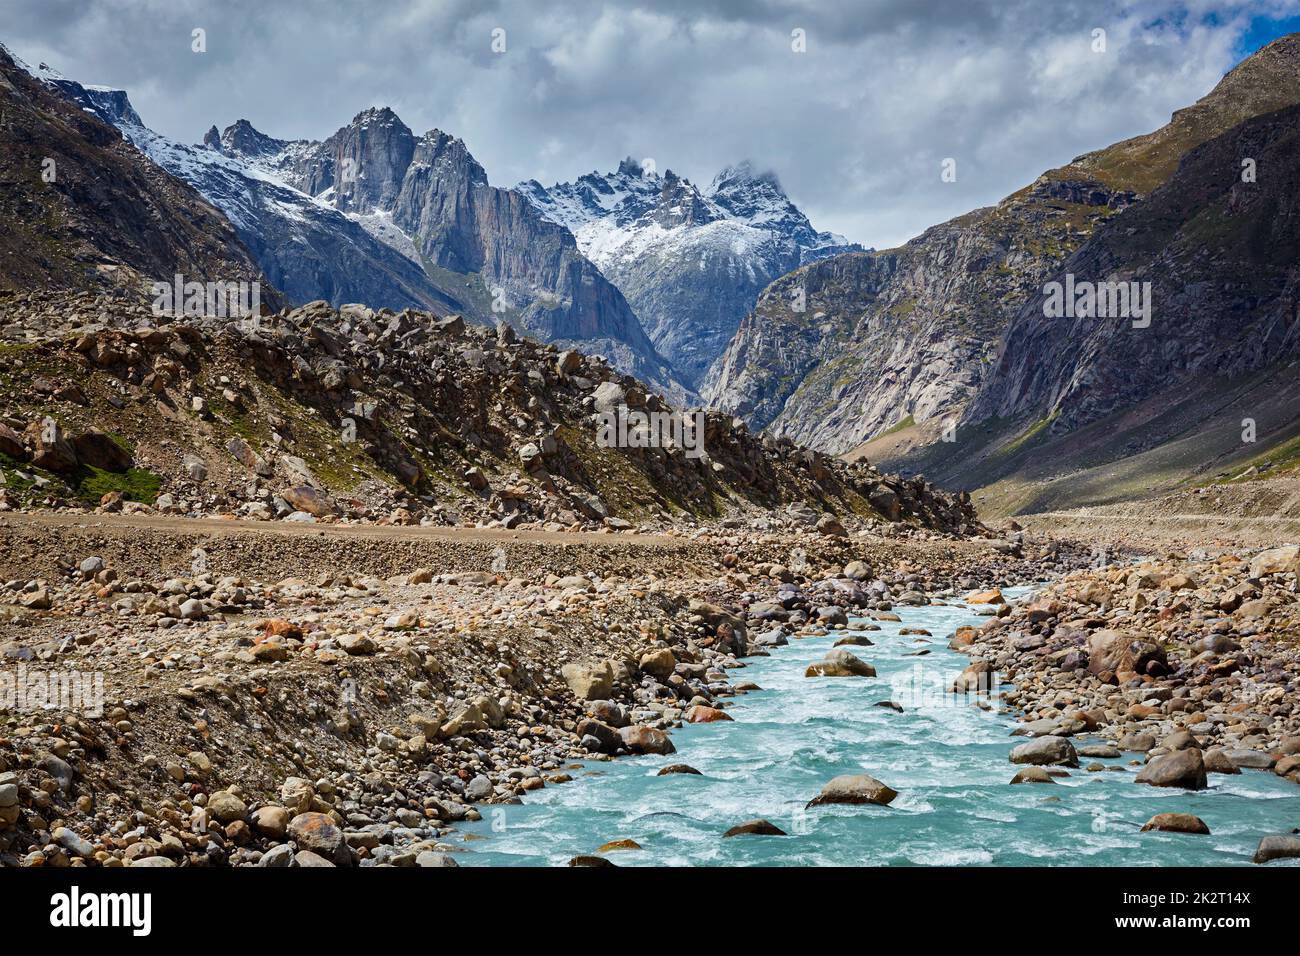 Chandra River in Lahaul Valley in Himalayas Stock Photo